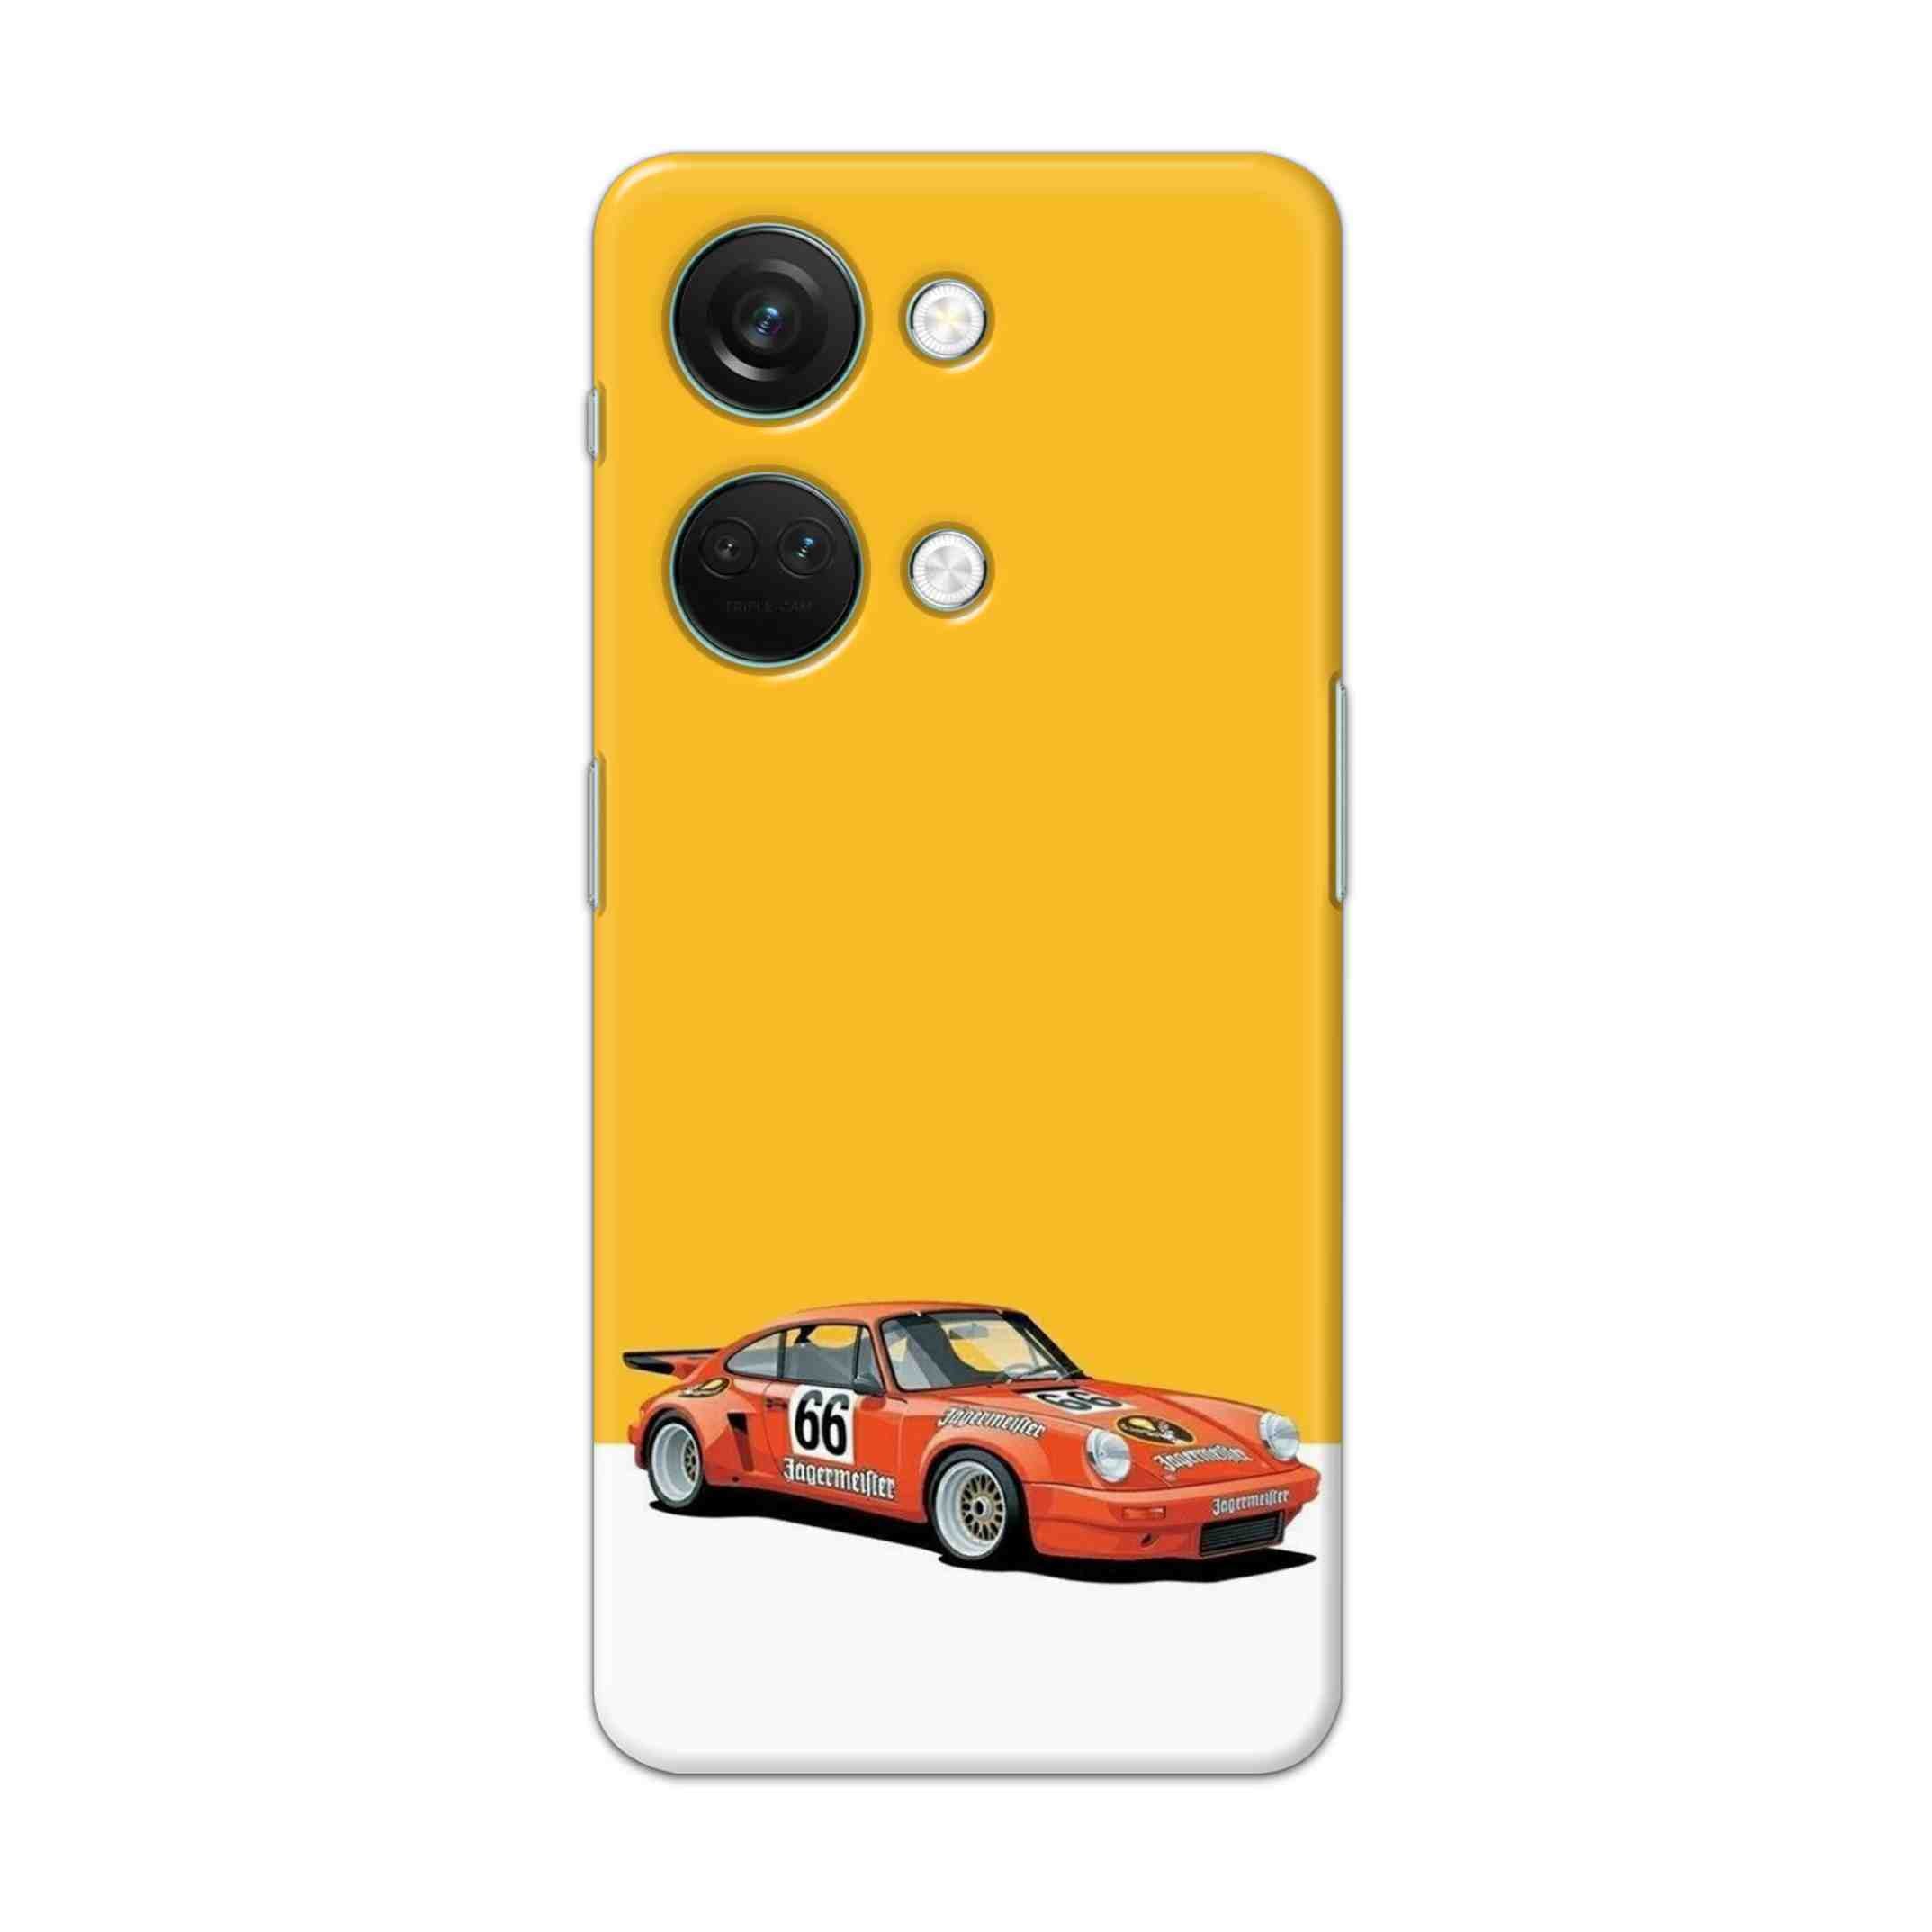 Buy Porche Hard Back Mobile Phone Case Cover For Oneplus Nord 3 Online